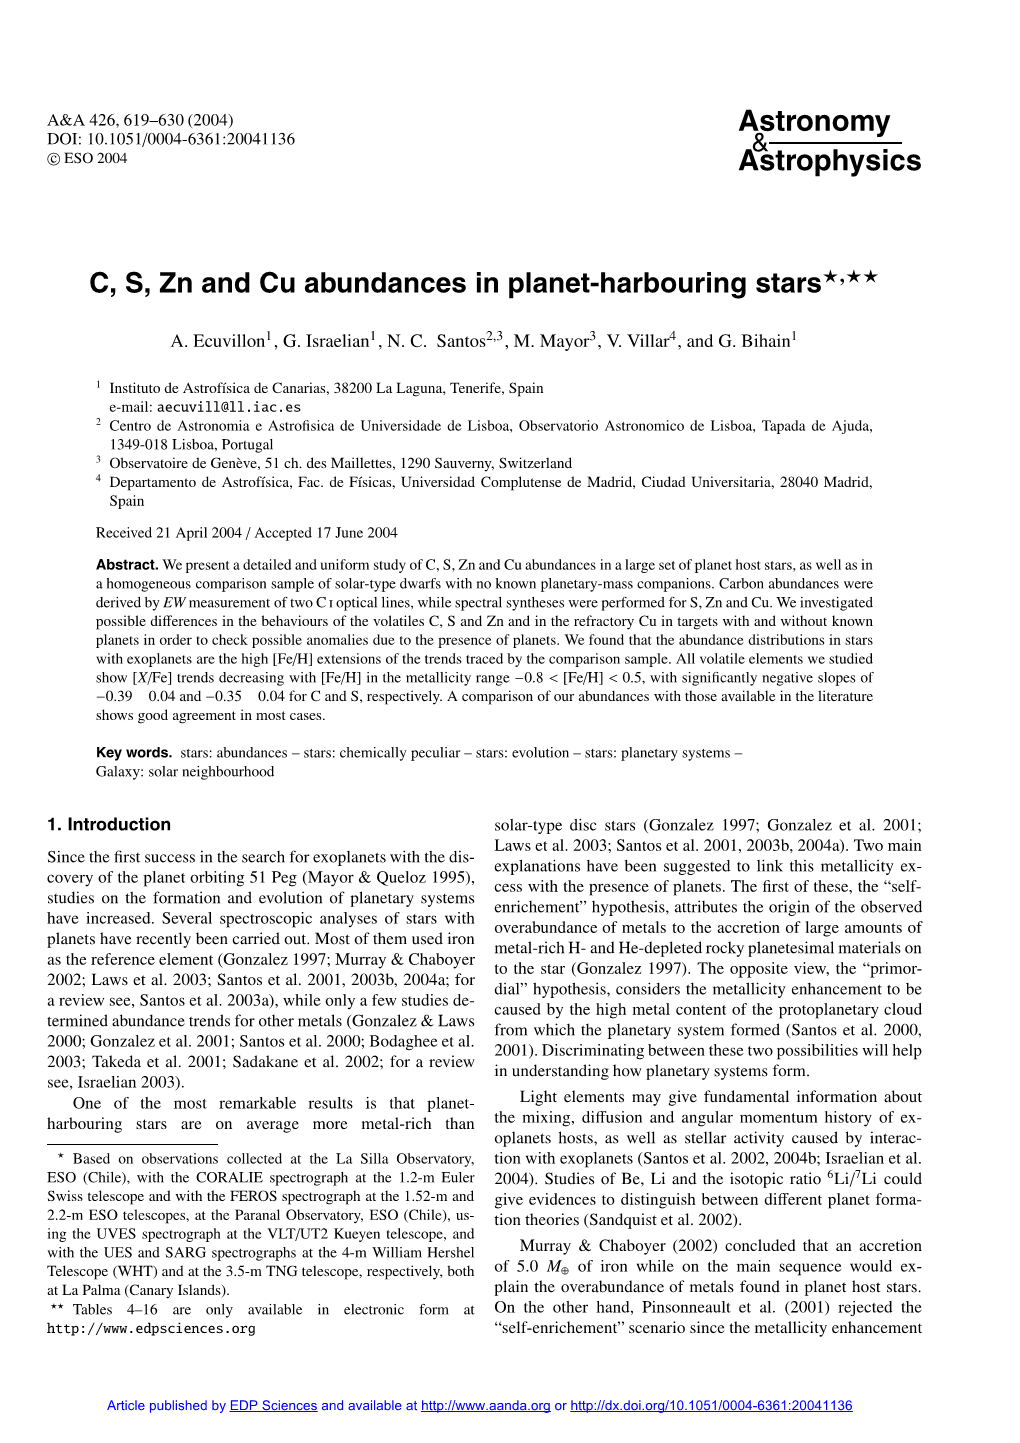 C, S, Zn and Cu Abundances in Planet-Harbouring Stars�,